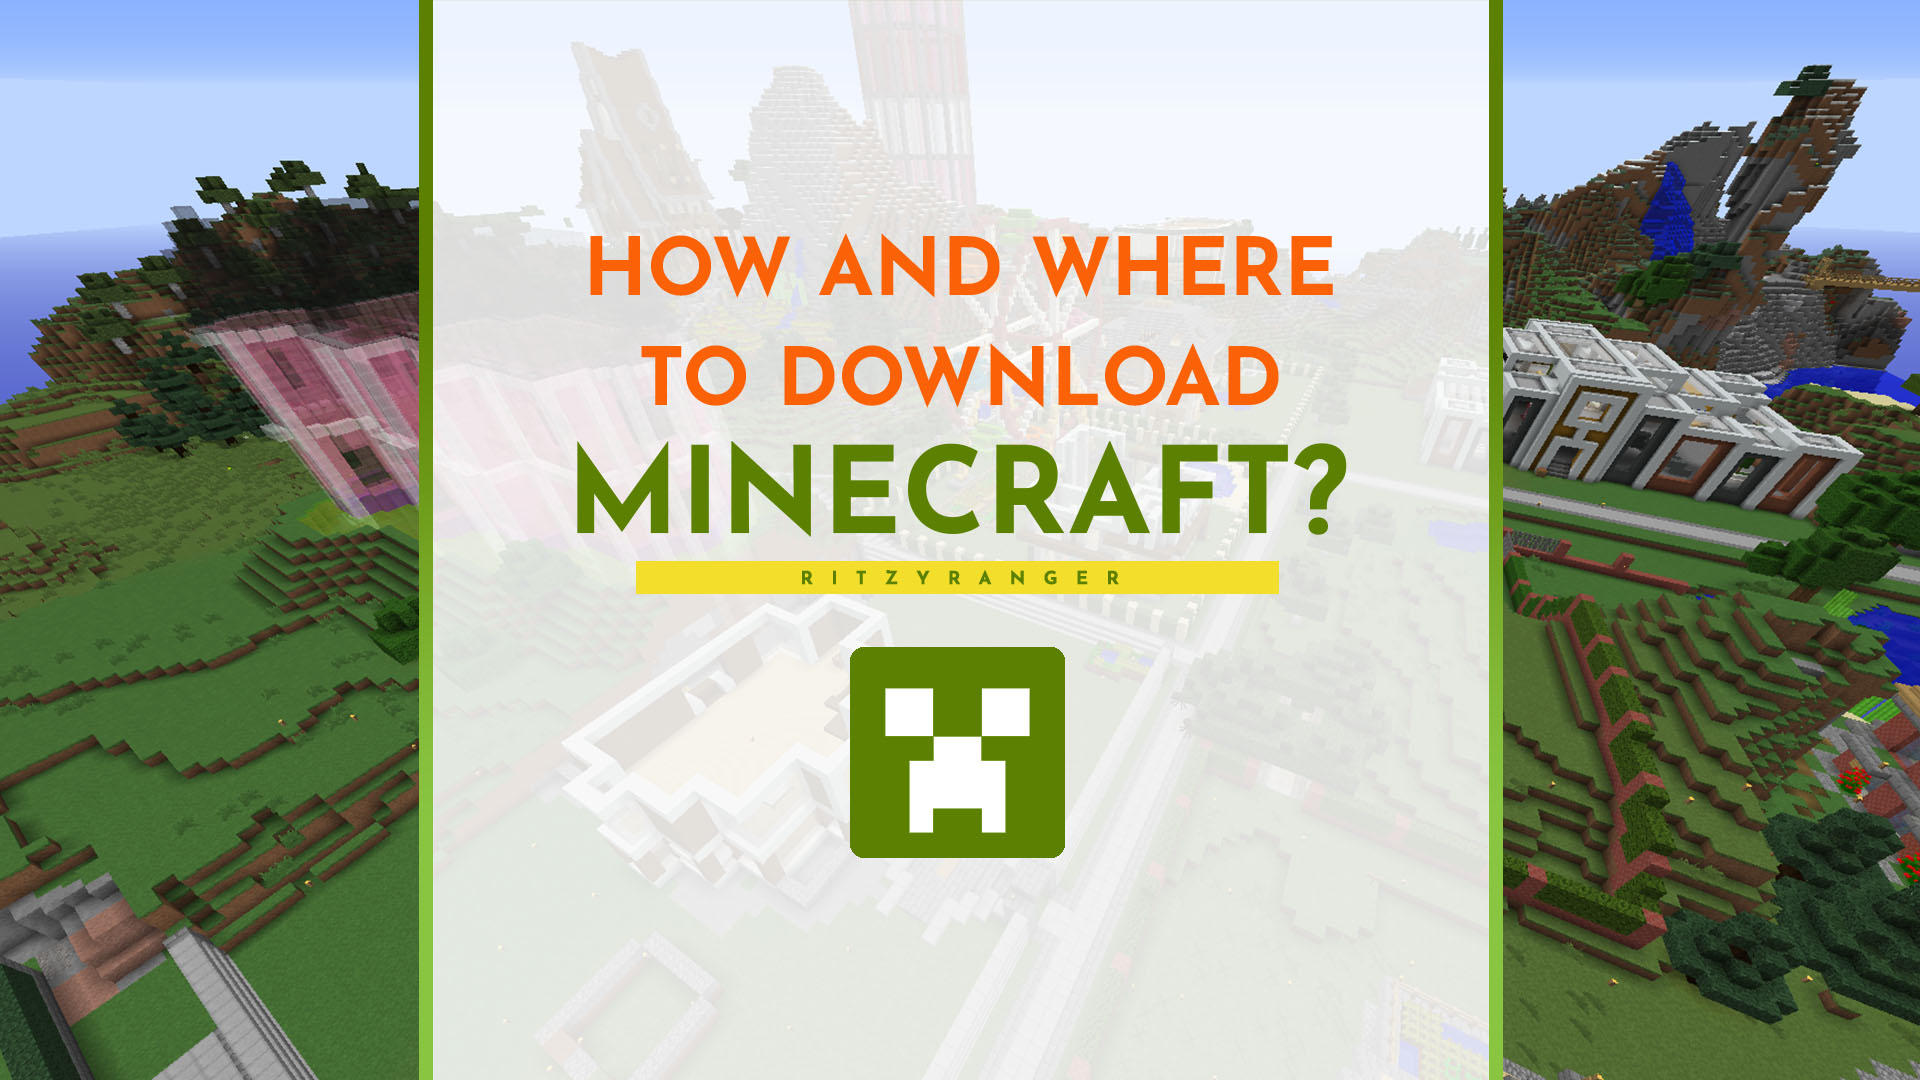 Where to download Minecraft?